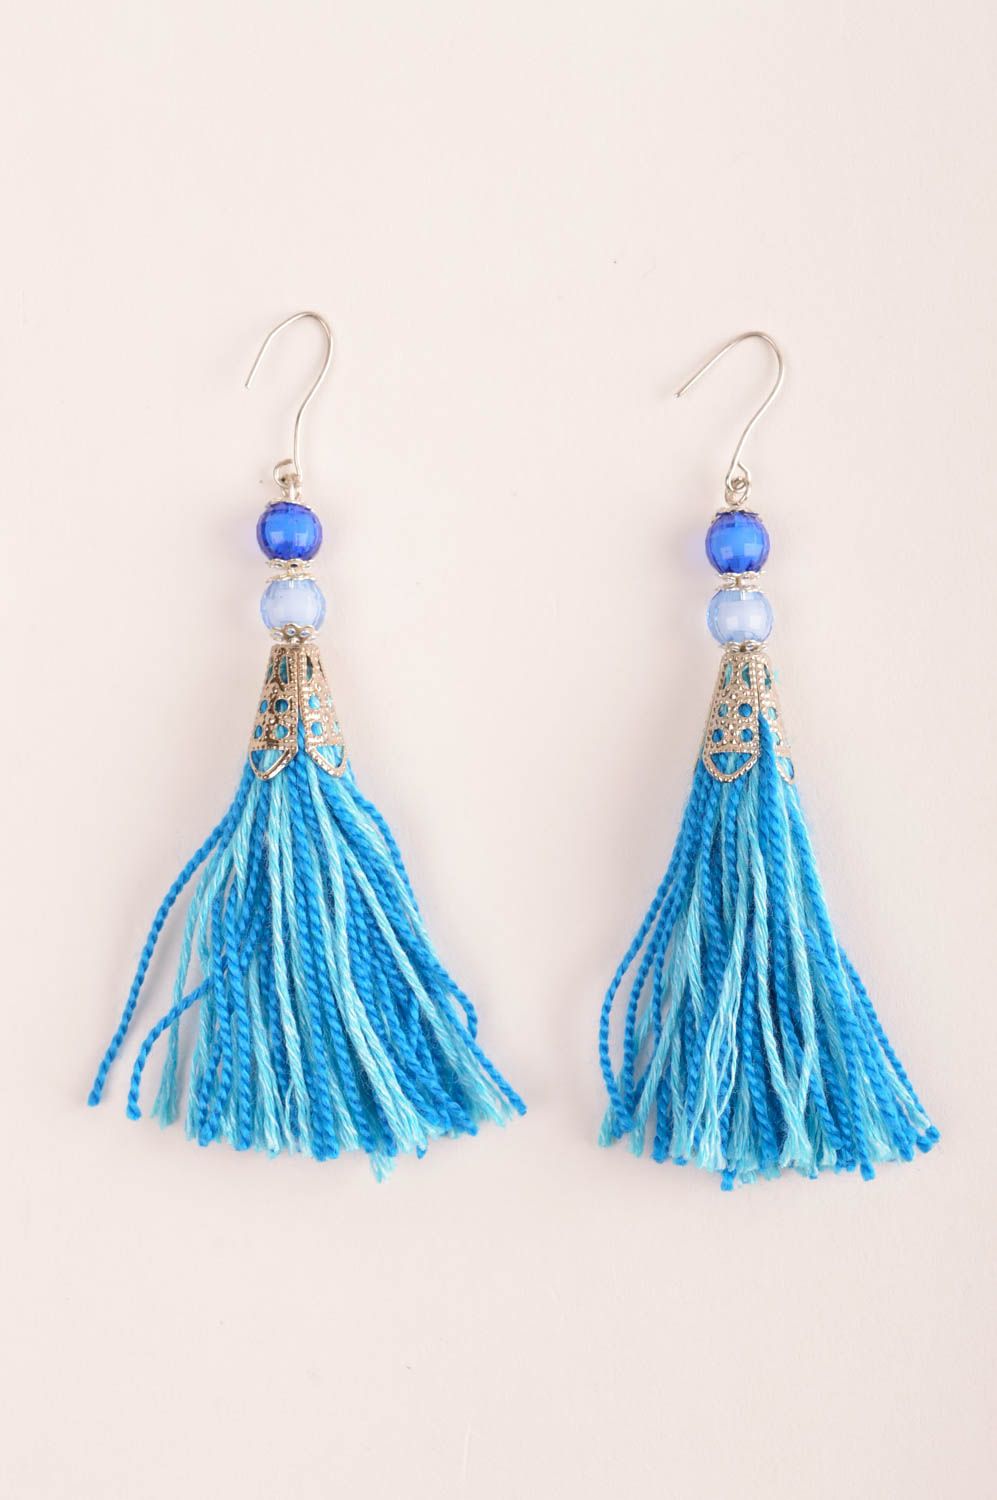 Unusual handmade metal necklace with beads textile tassel earrings gifts for her photo 3